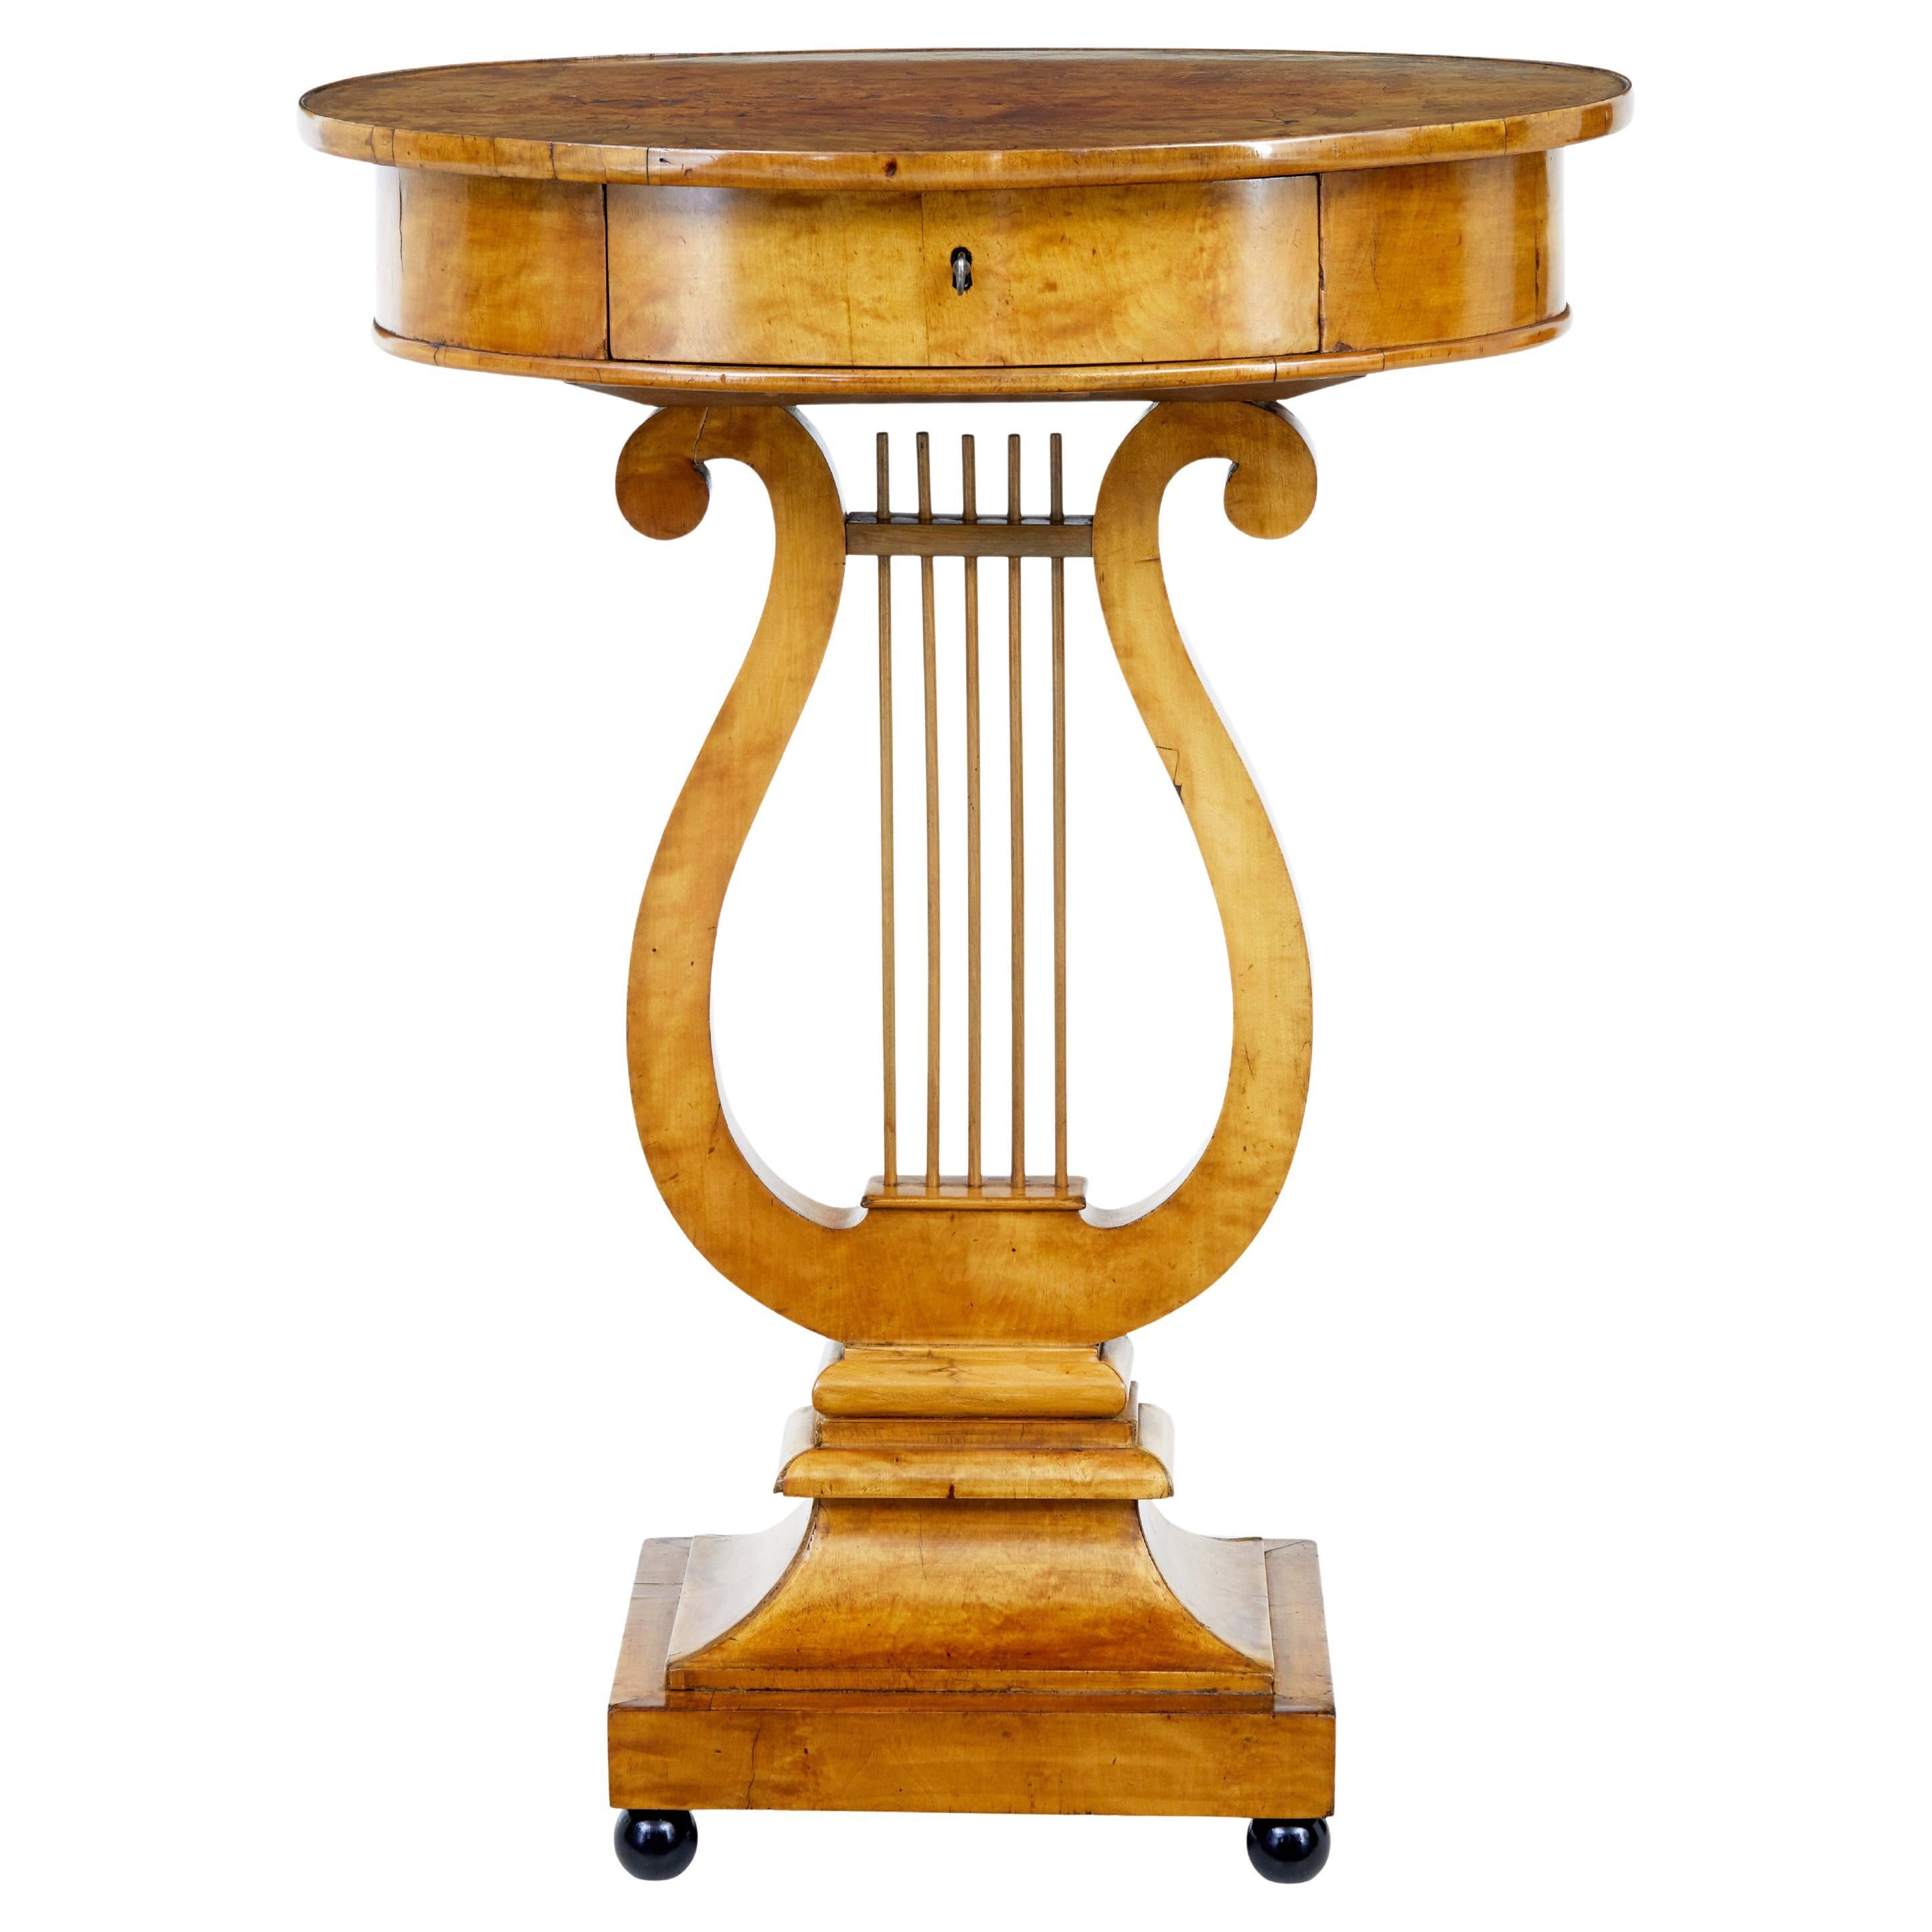 Early 19th century birch empire lyre form side table